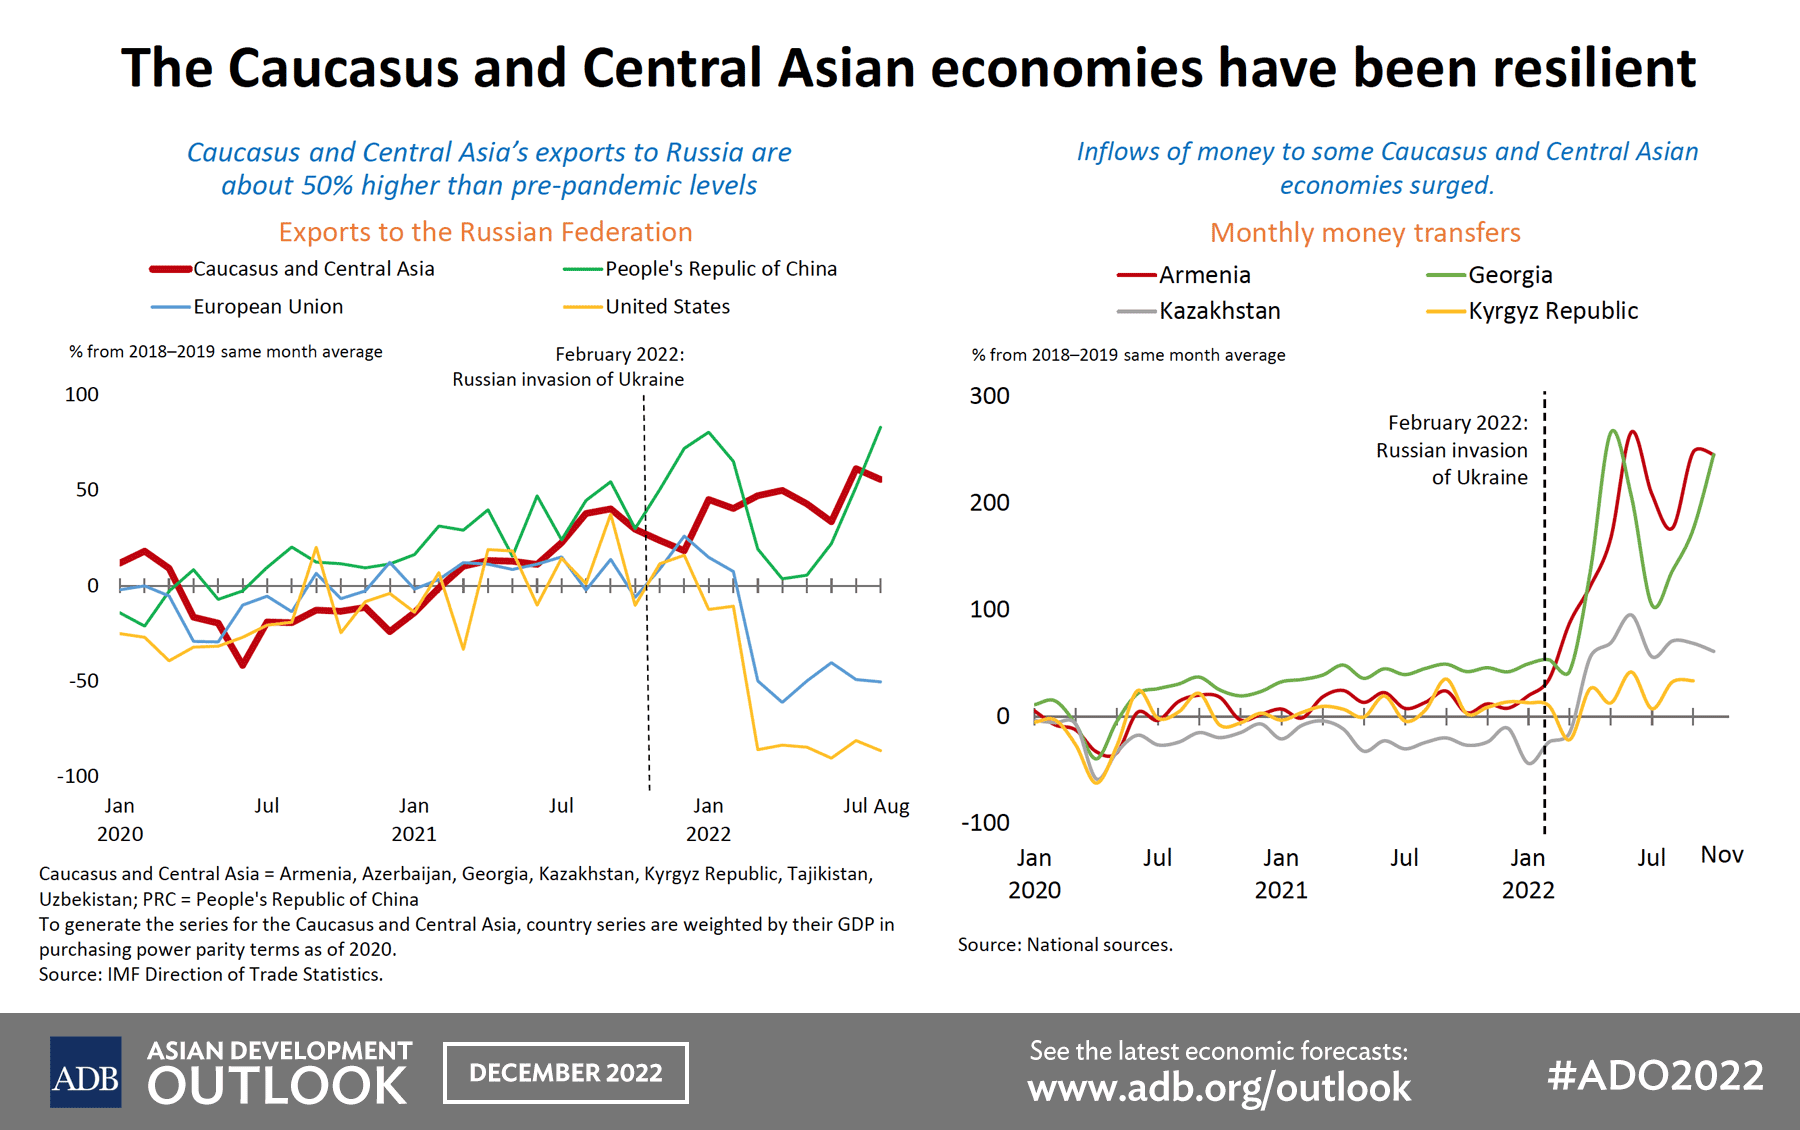 The Caucasus and Central Asian economies have been resilient